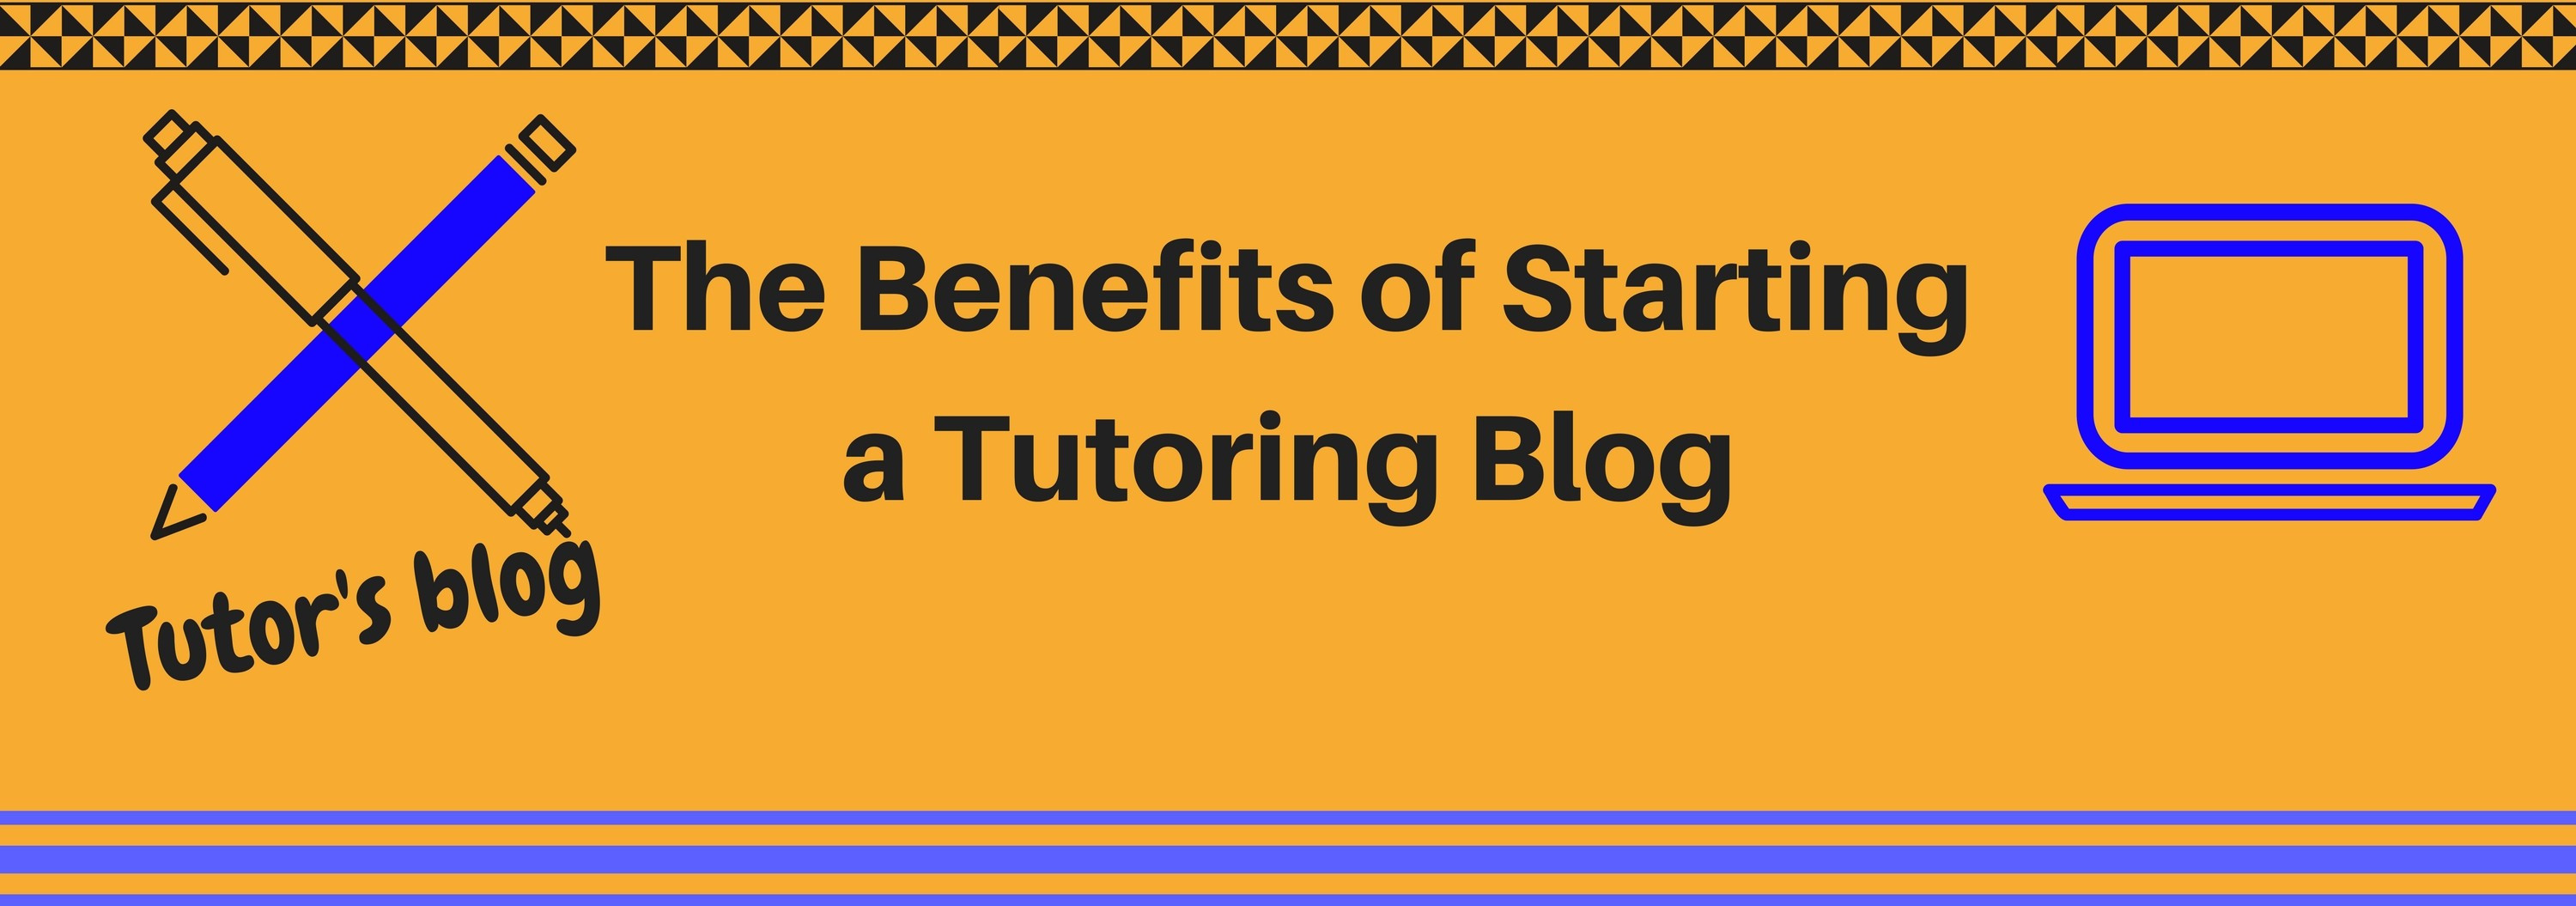 The Benefits of Starting a Tutoring Blog